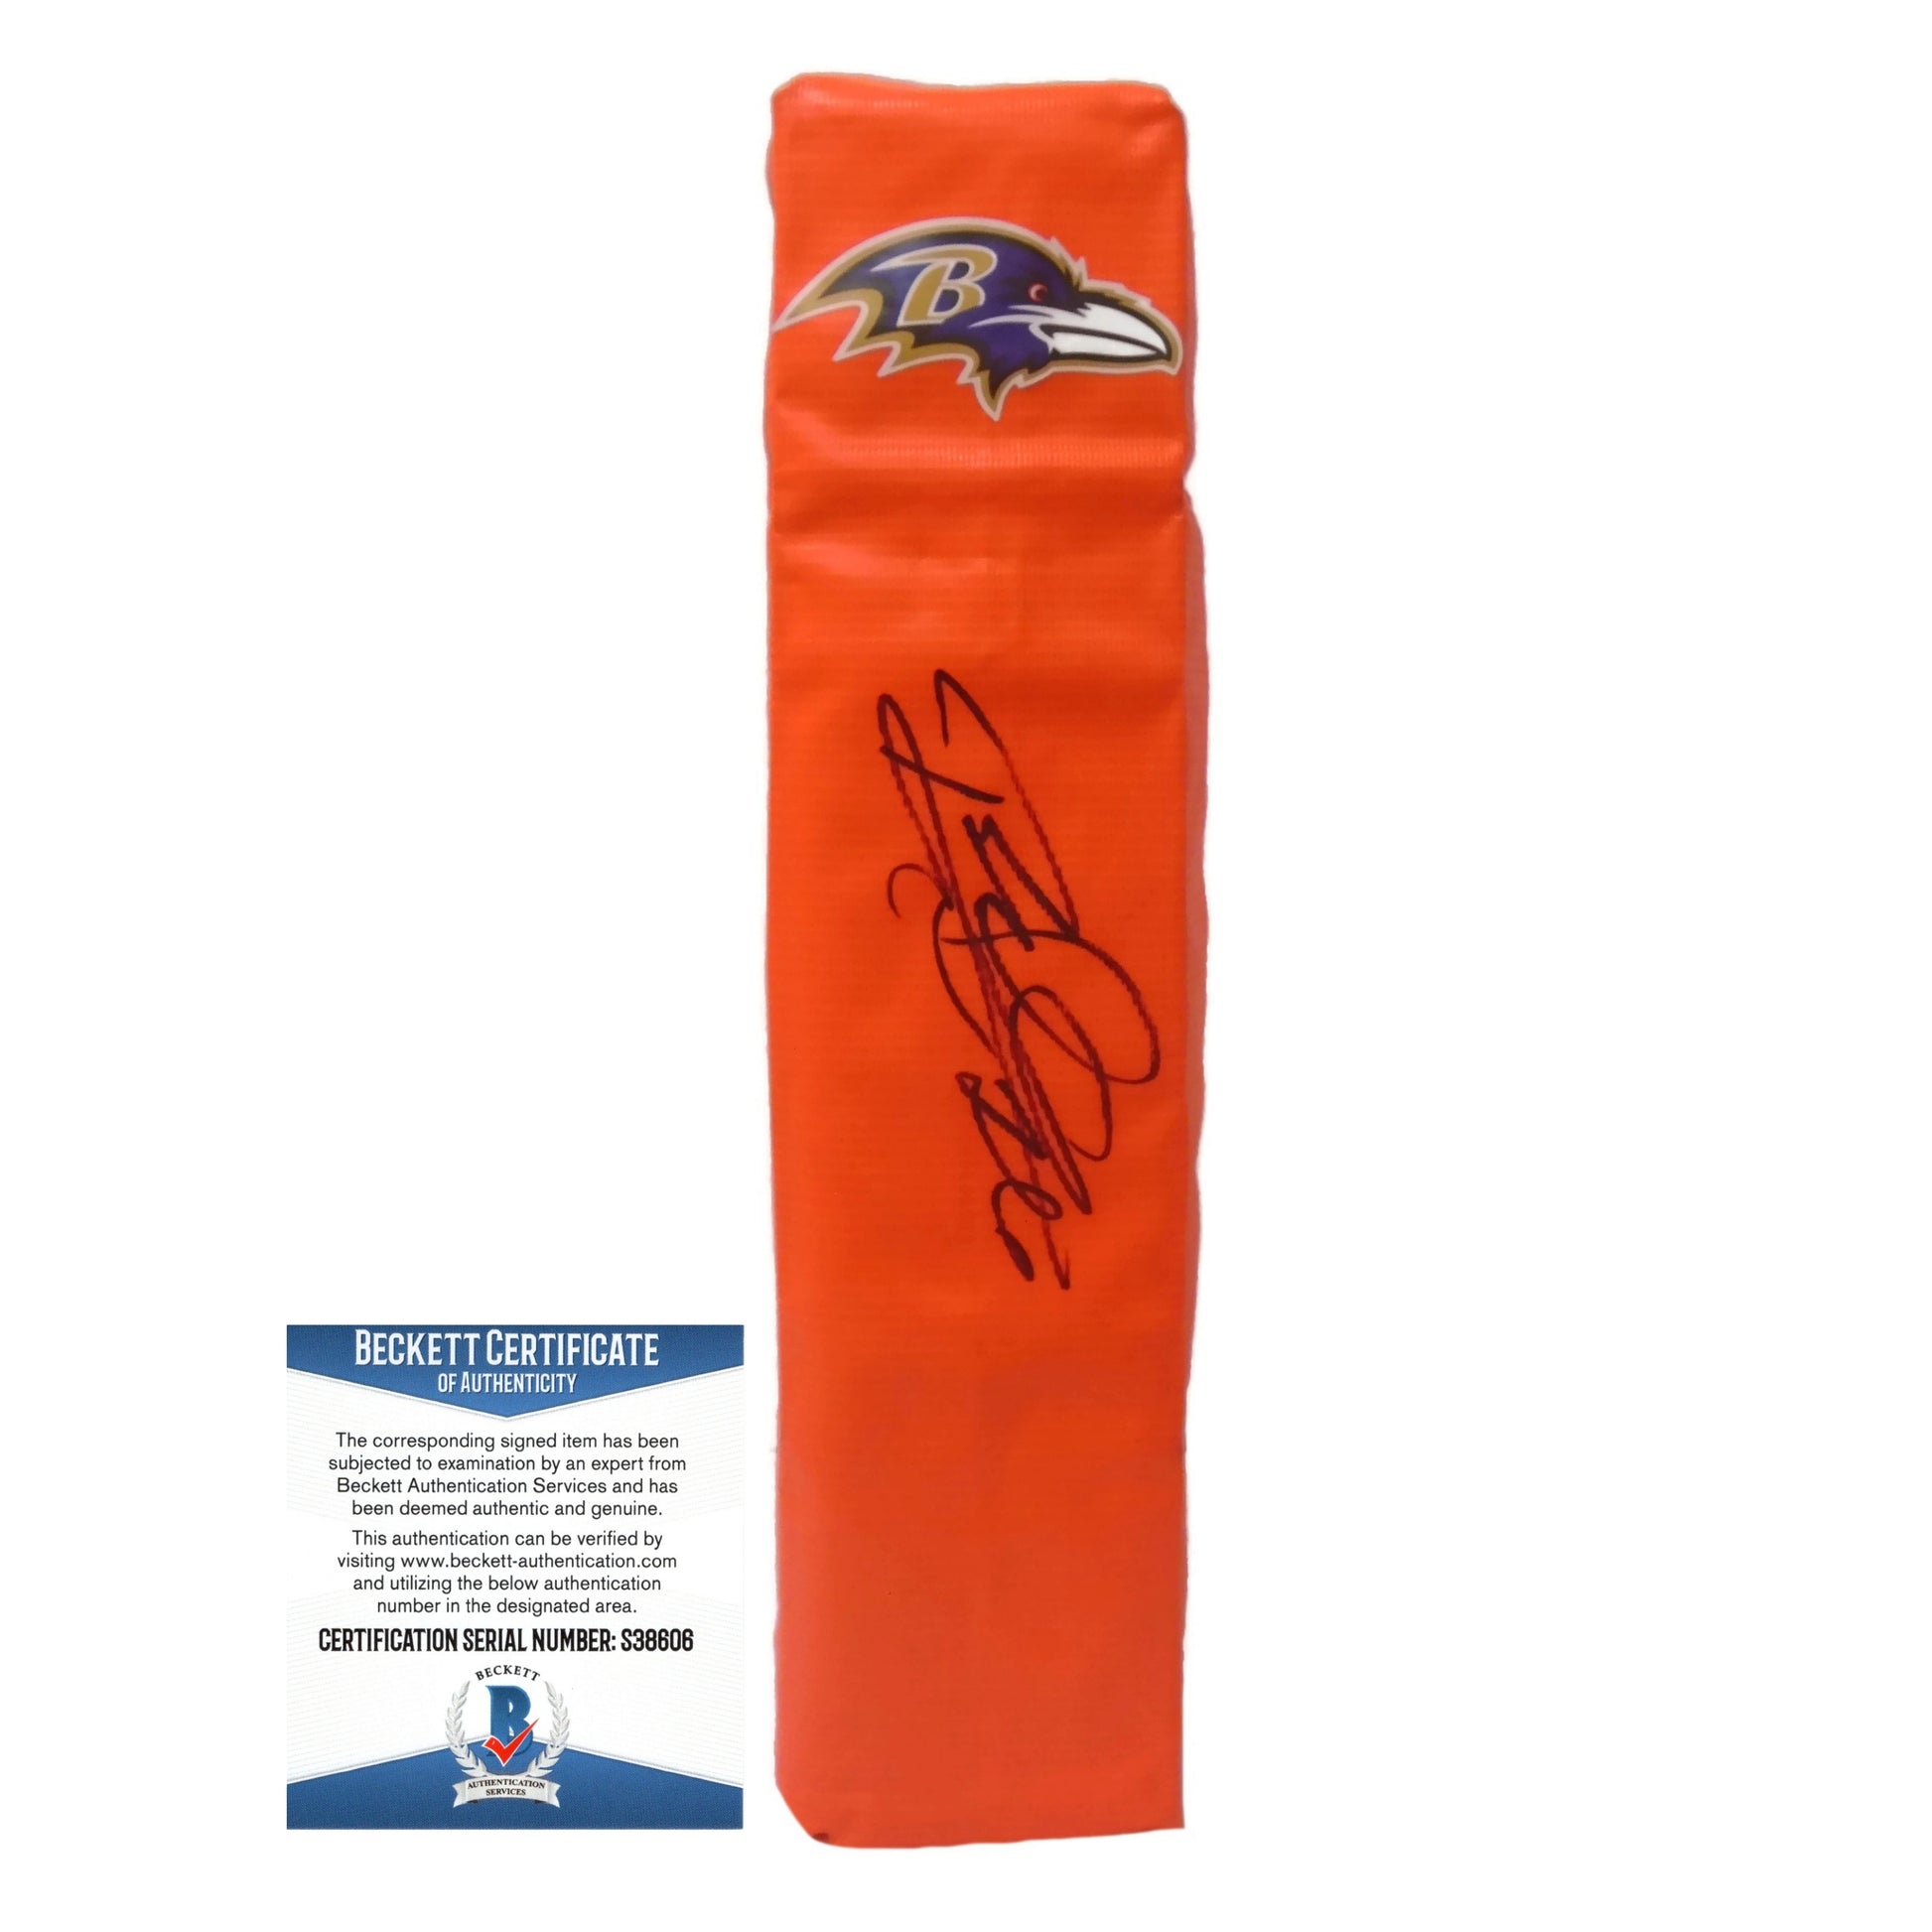 Football End Zone Pylons-Autographed - Rod Woodson Signed Baltimore Ravens Football TD Pylon- Purdue Boilermakers- Proof Photo - Beckett BAS Authentication 401